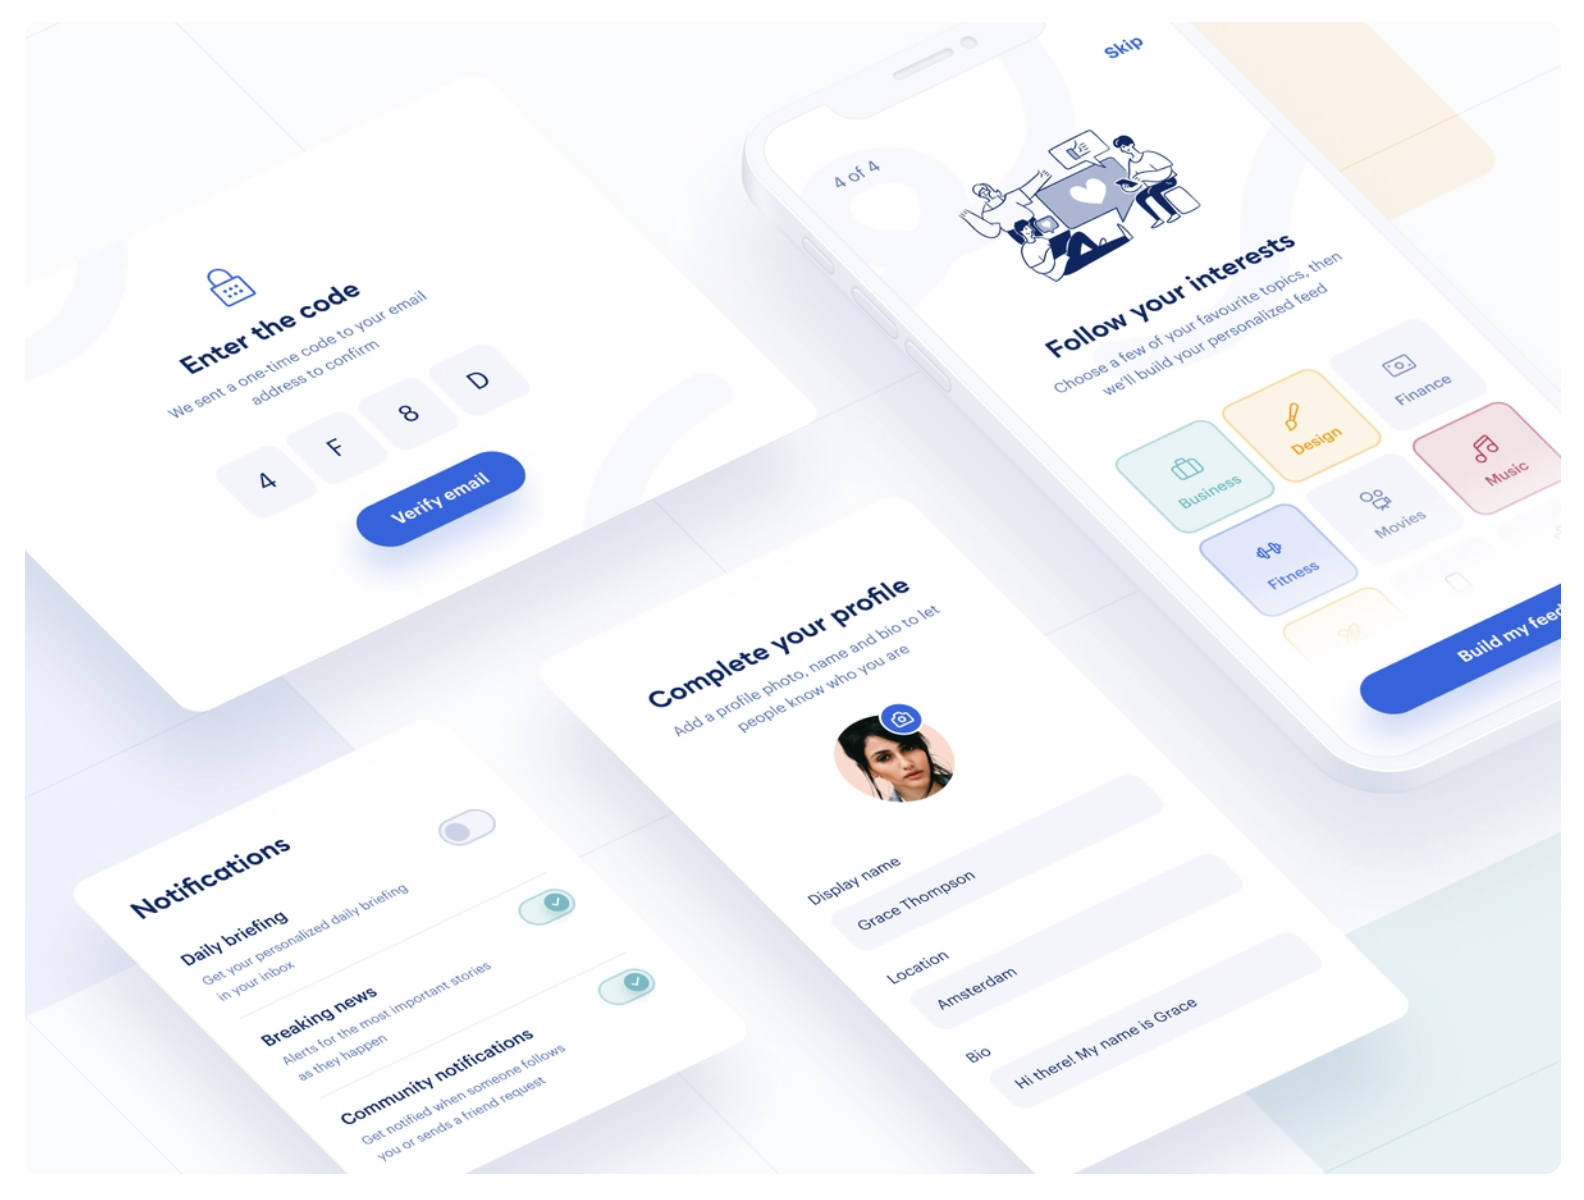 UX Projects: Mobile App Signup Flow